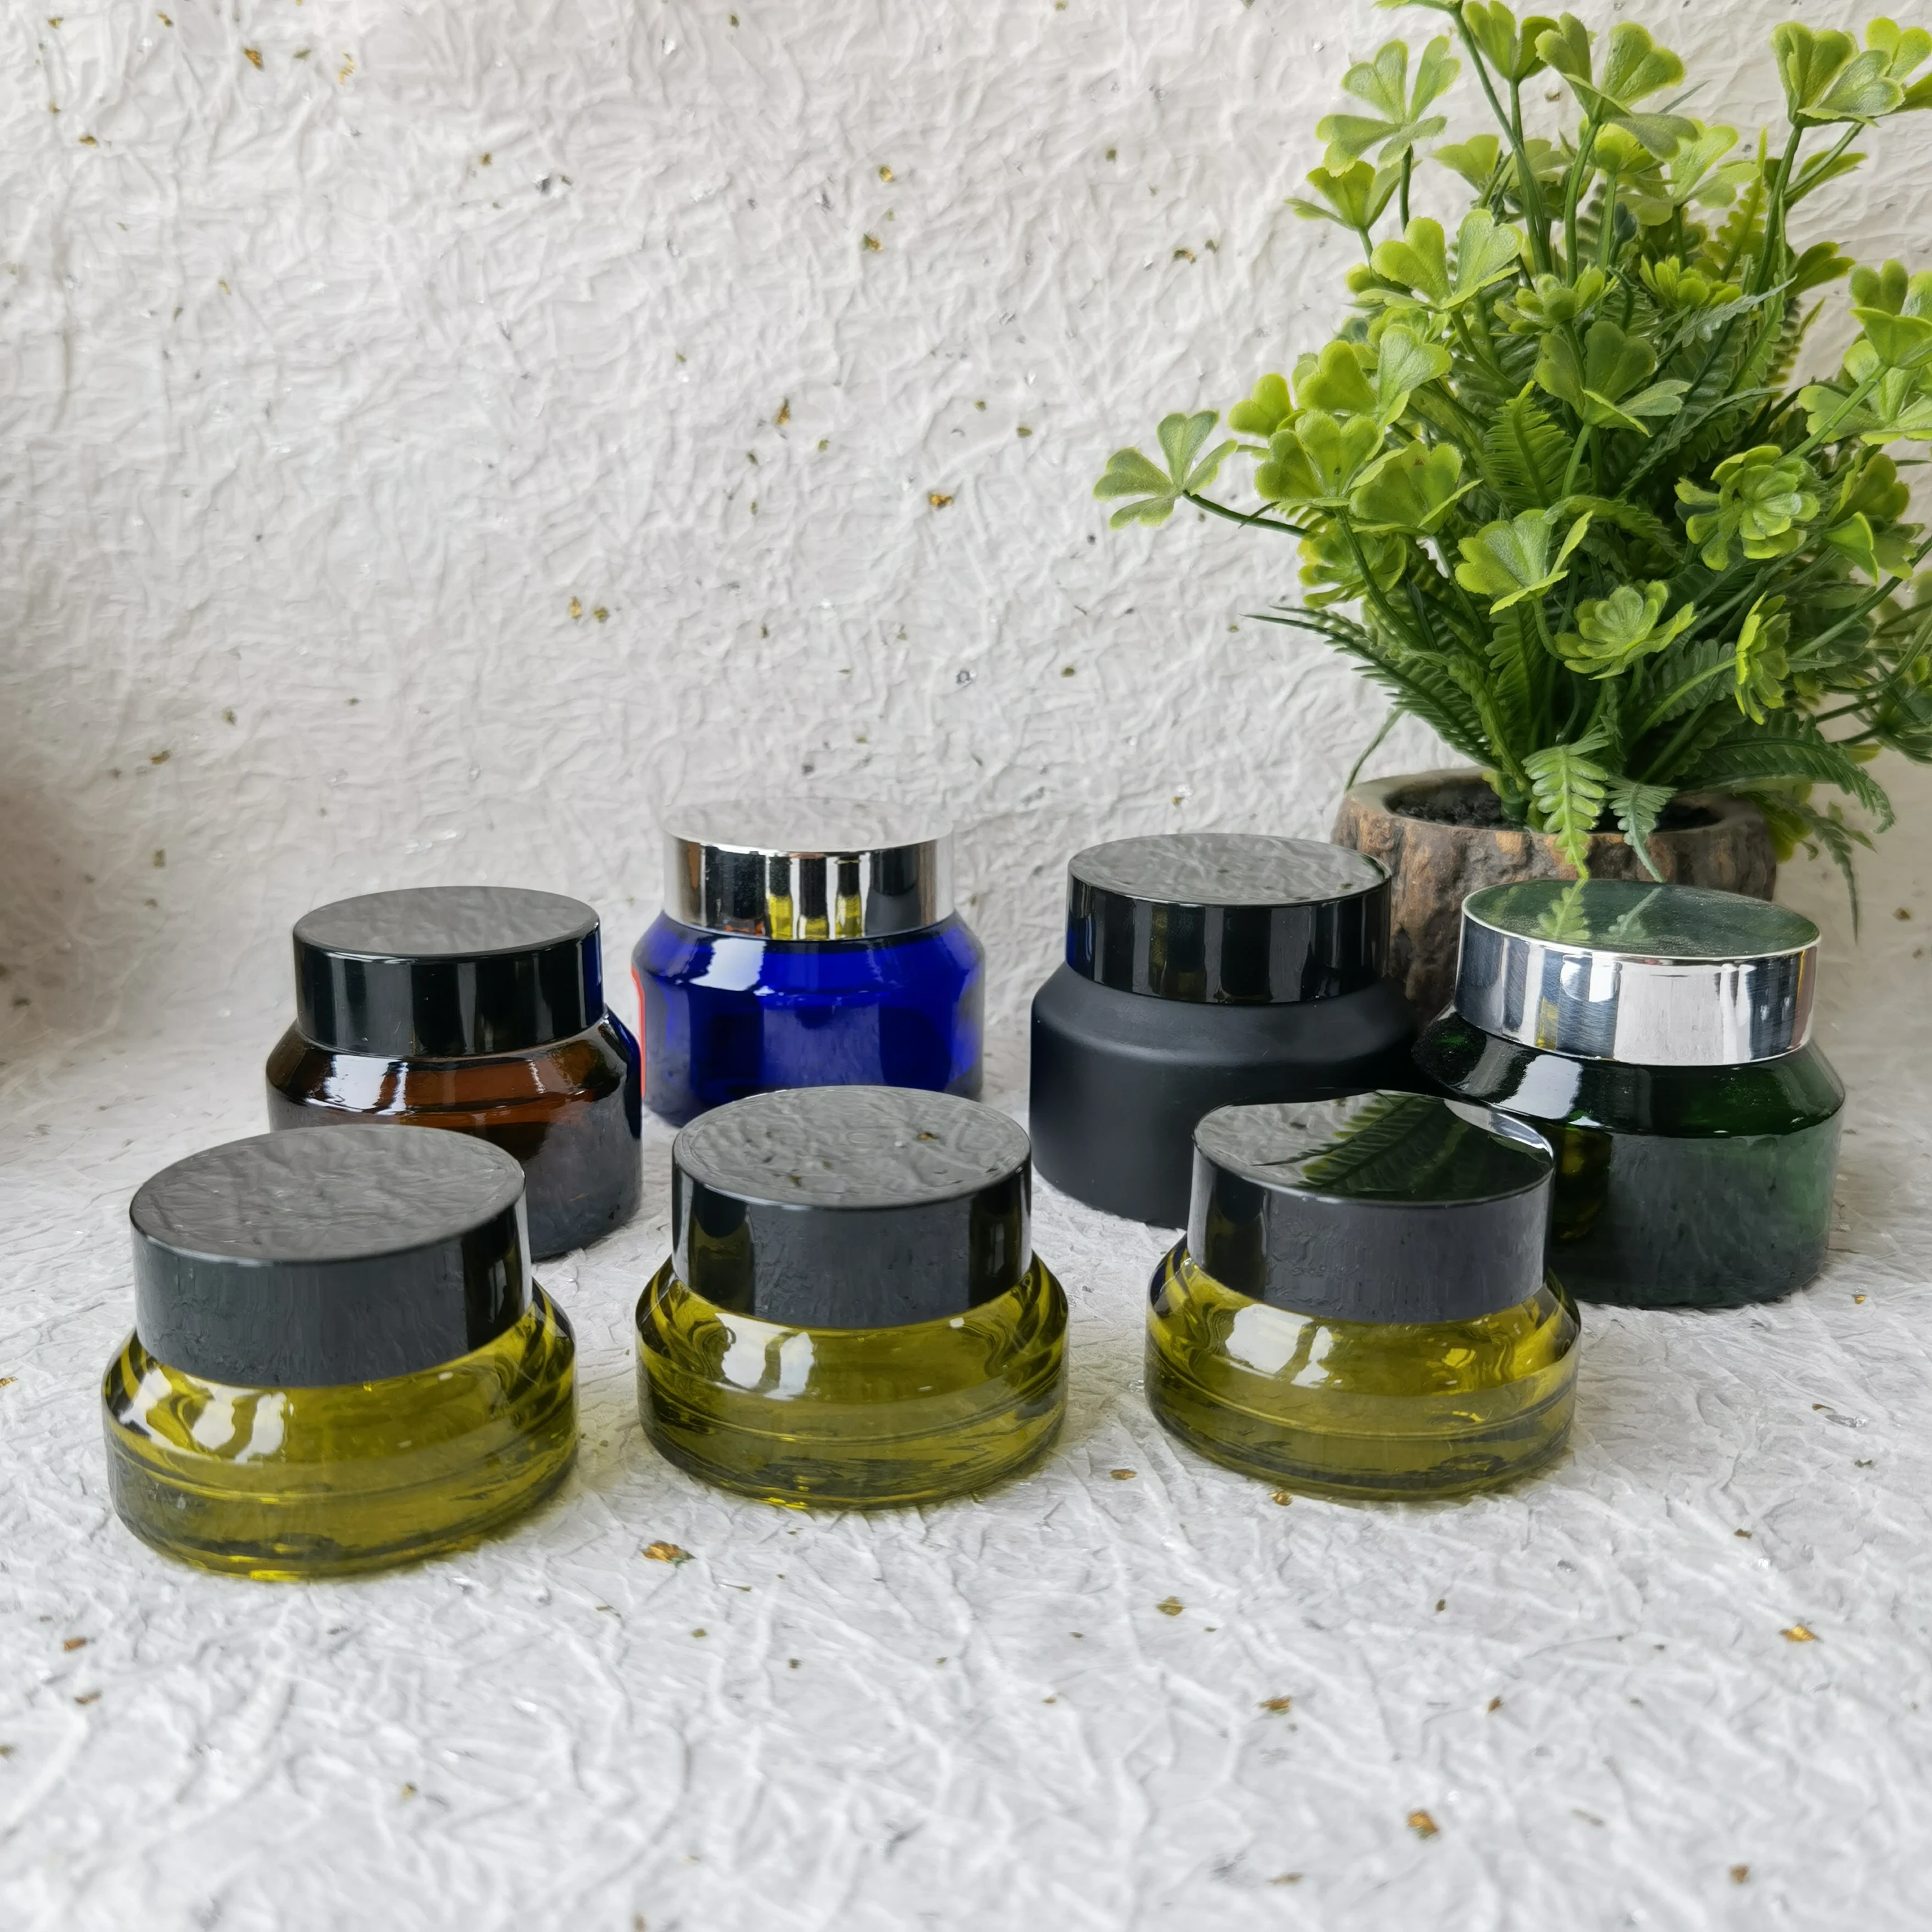 5pcs 15g/30g/50g Empty Colorful Skin Care Glass Refillable Cream Jar Pot Witth Plastic Cap Travel Vials Cosmetic Container